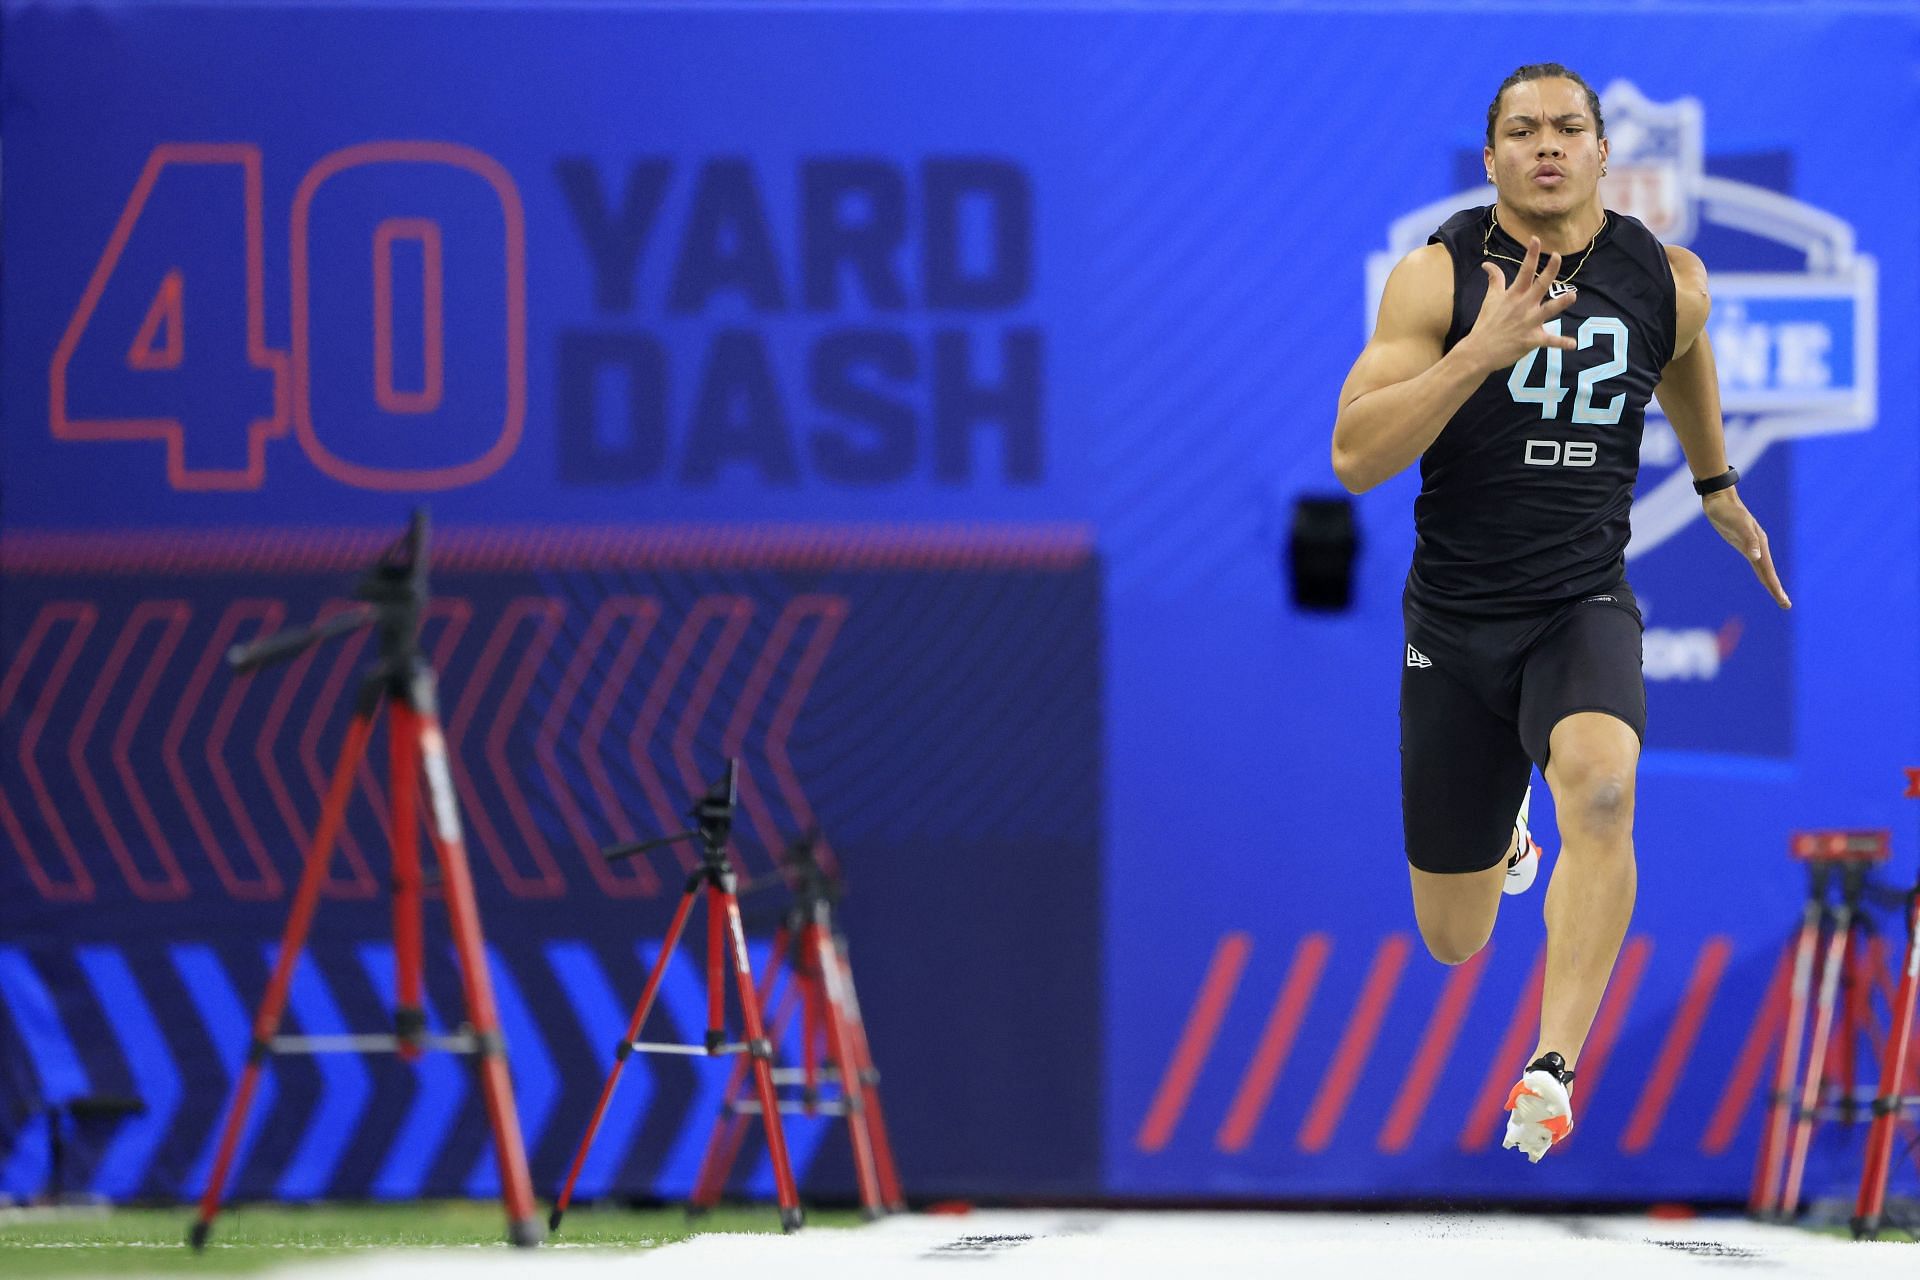 2022 NFL Scouting Combine: Dates, times, location, how to watch and more